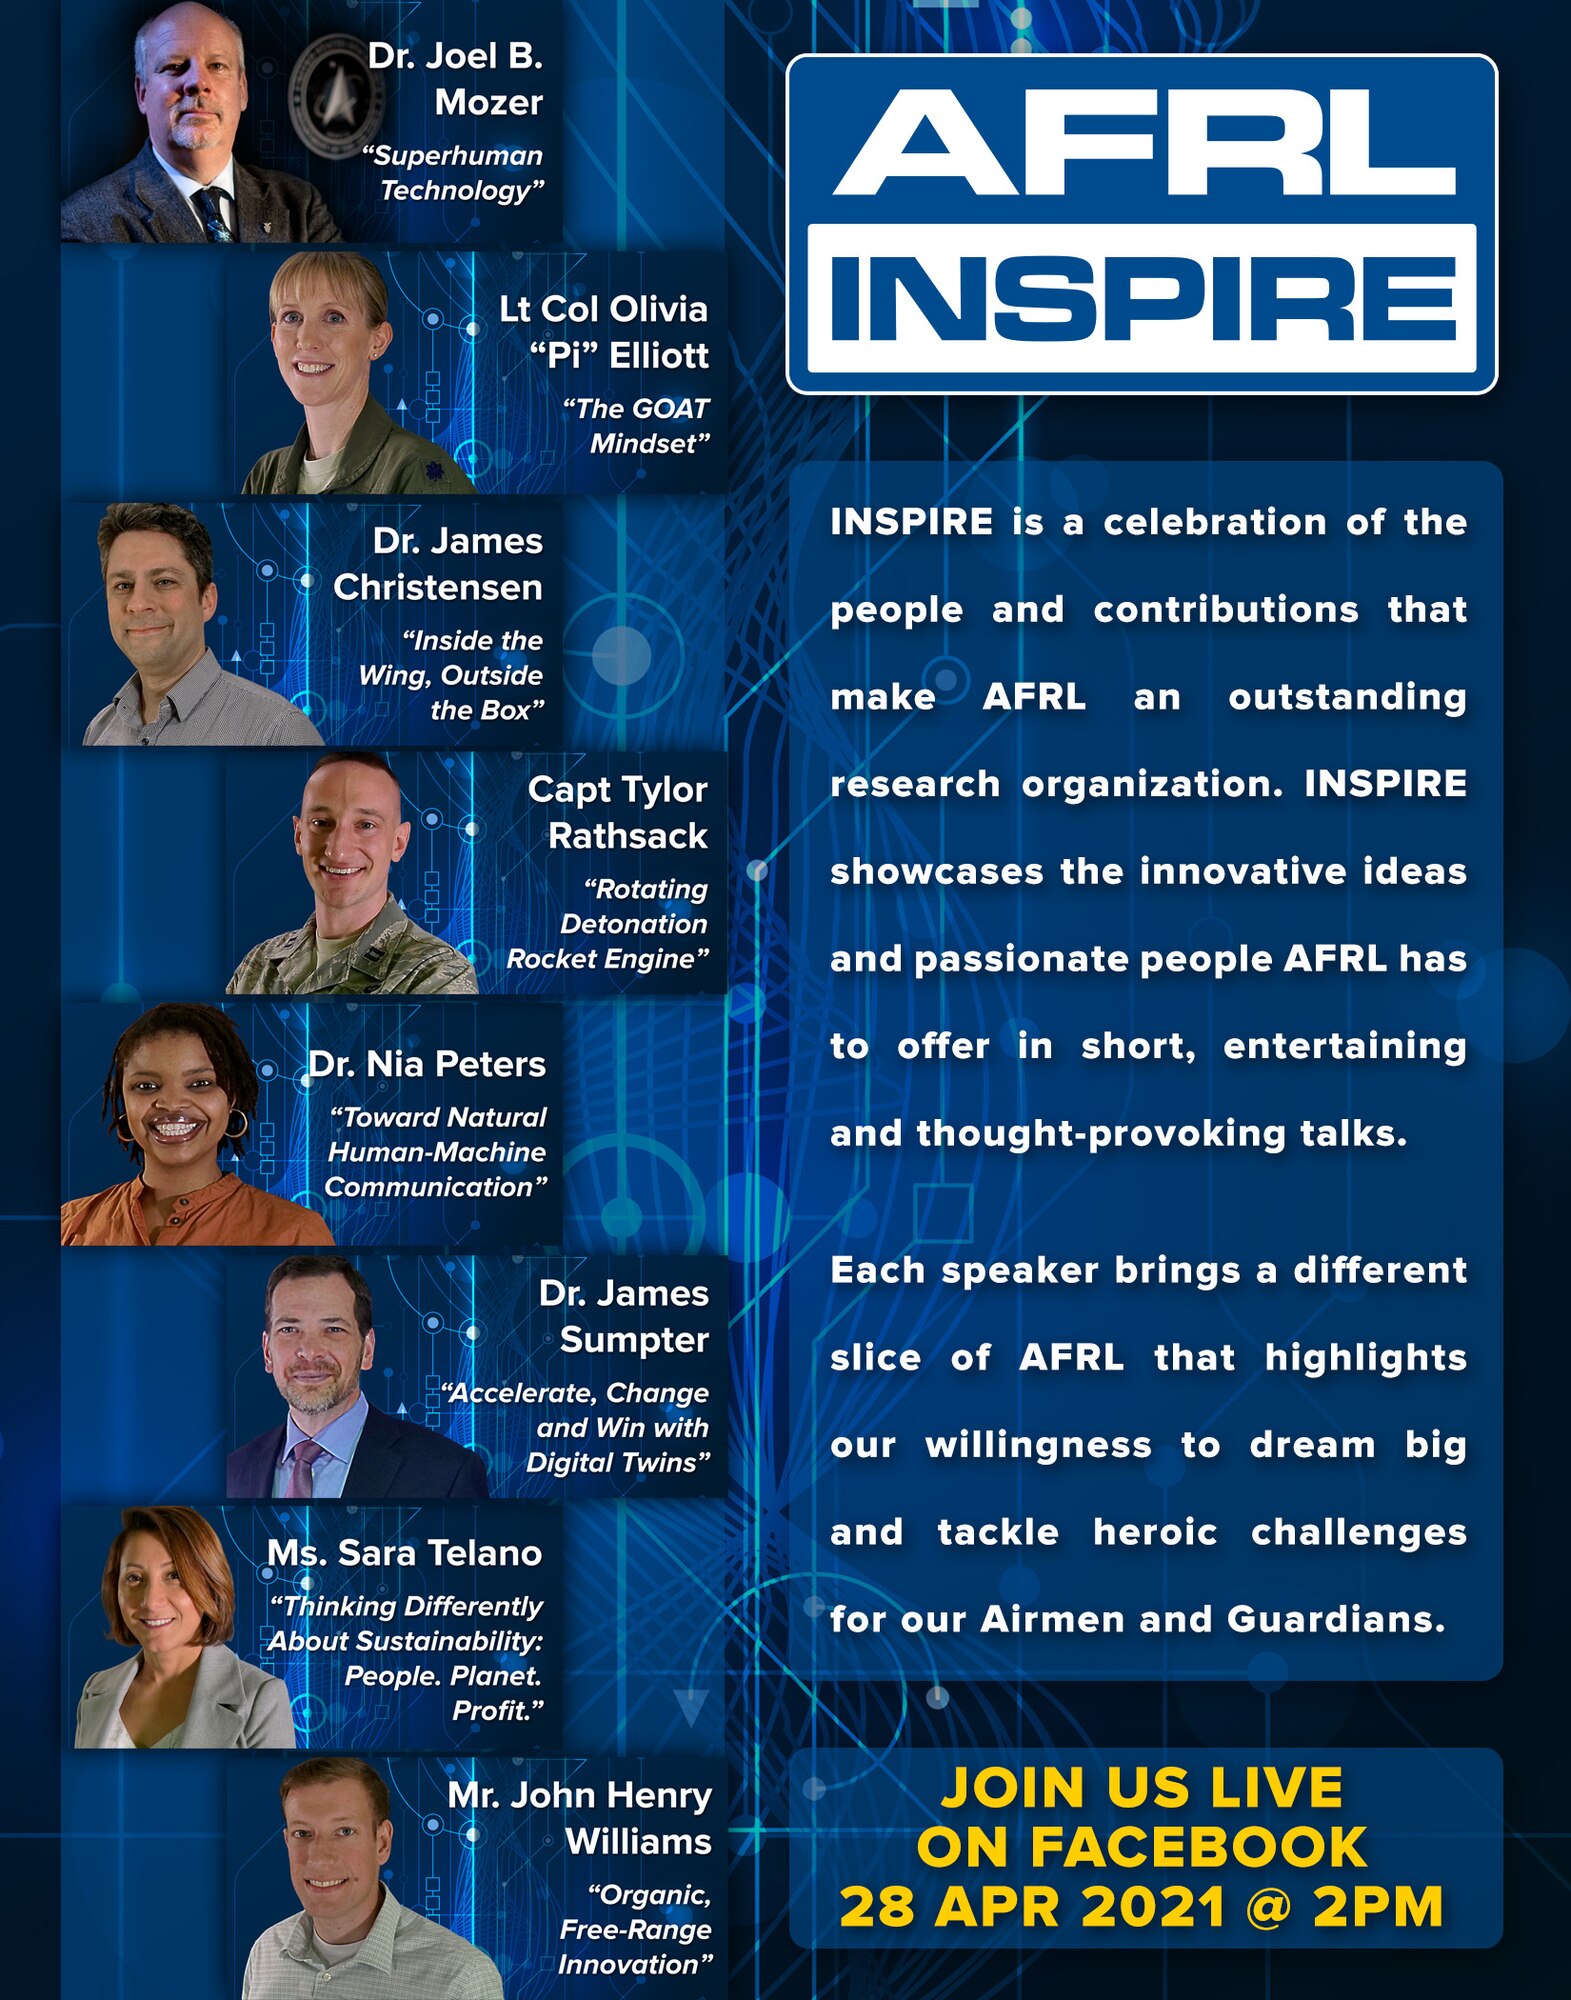 The AFRL Inspire event features the innovative ideas and passionate people AFRL has to offer as they provide entertaining and thought-provoking talks, share personal stories and make complex topics more understandable. The 2021 event will be a two-hour special event with eight TEDx-style talks, livestreamed from the Air Force Institute of Technology’s Kenney Hall Auditorium April 28 beginning at 2 p.m. EDT. (U.S. Air Force illustration/Patrick Londergan and Randy Palmer)